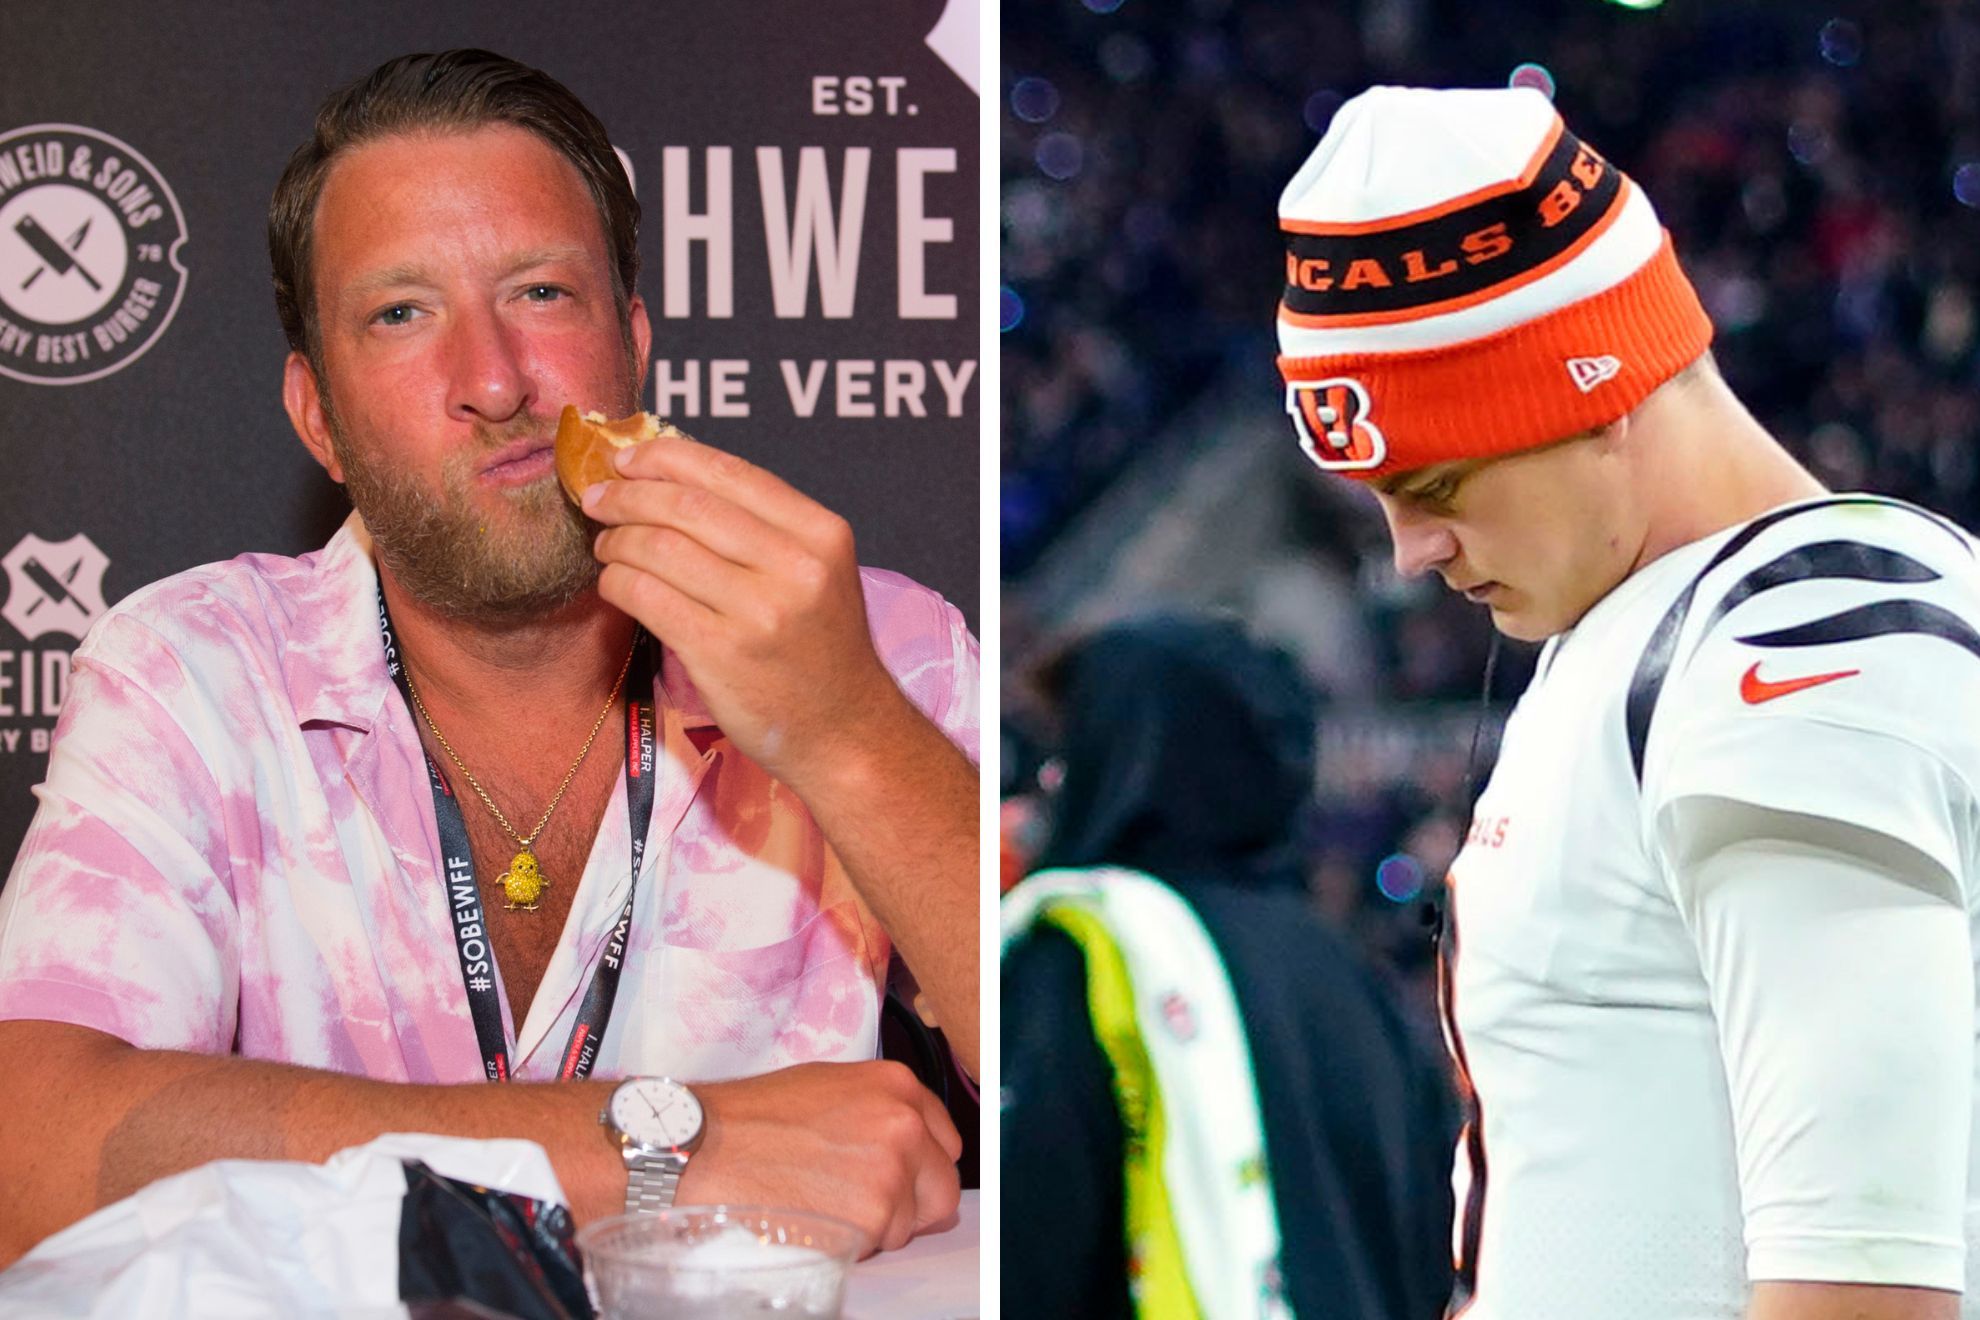 Barstools Dave Portnoy announces class action against Bengals over Joe Burrow injury